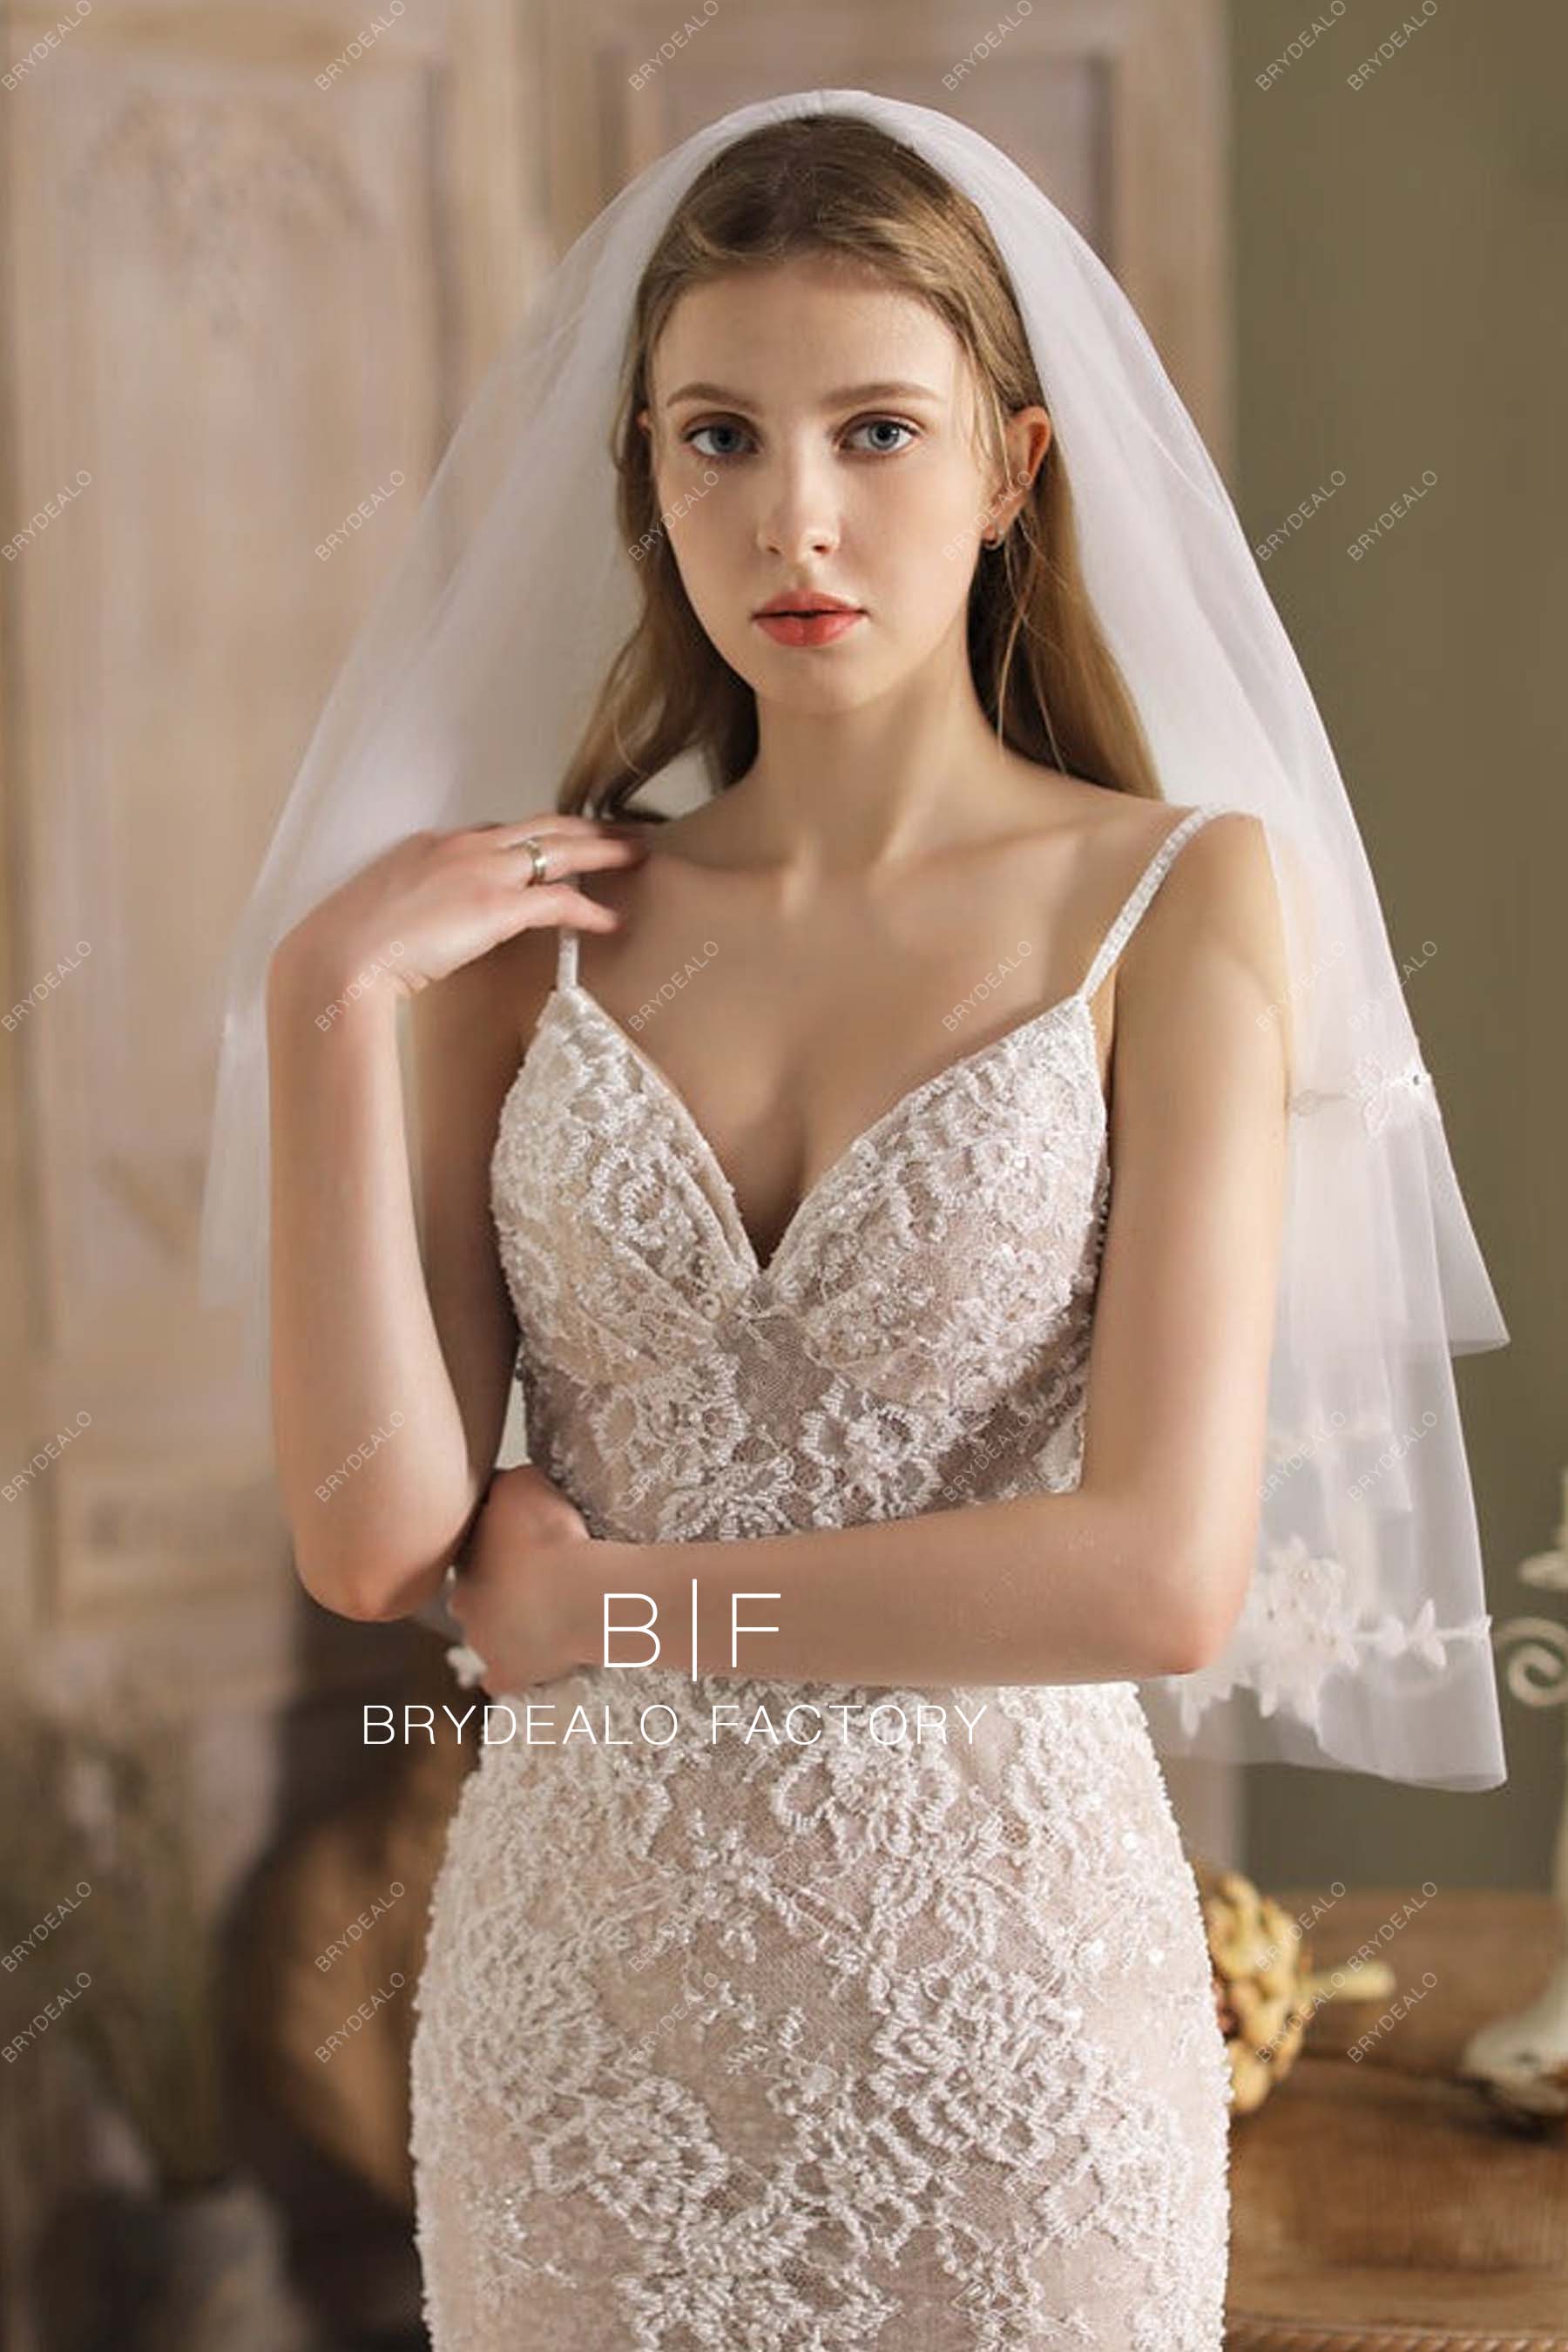 Two-Tiered Lace Bridal Veil Elbow Length Wedding Veil